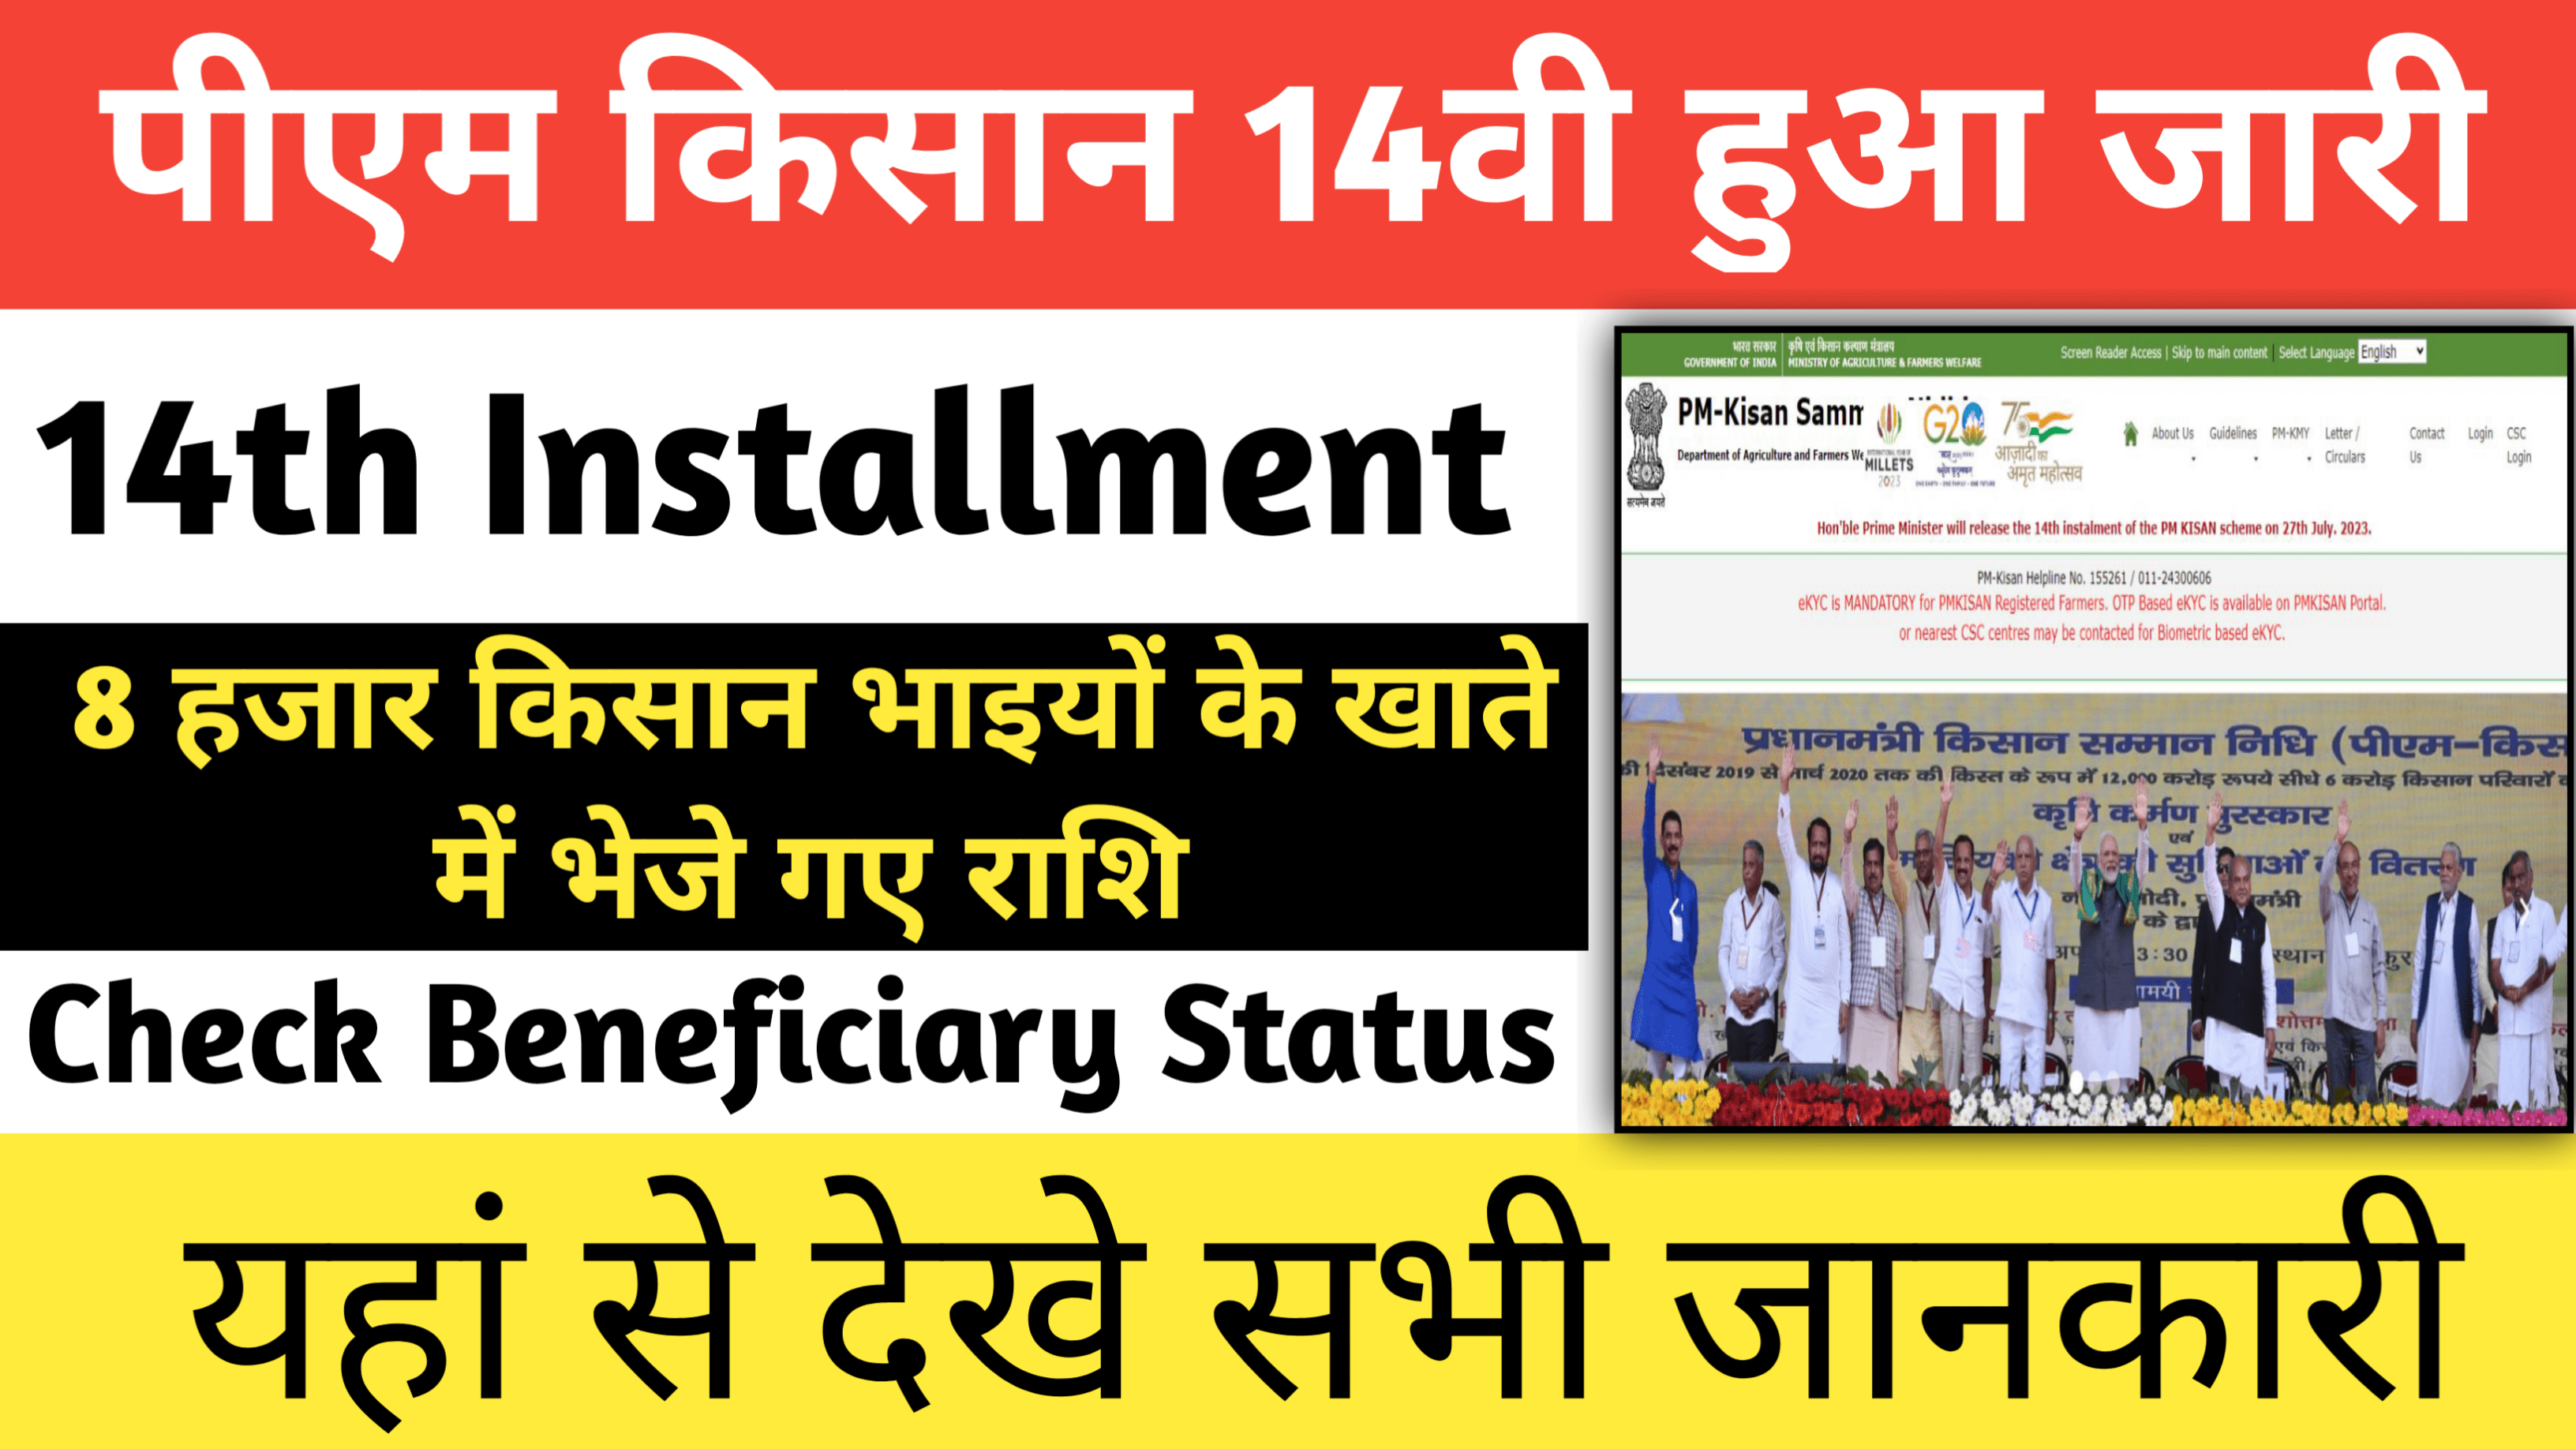 PM Kisan 14th Installment Payment Update